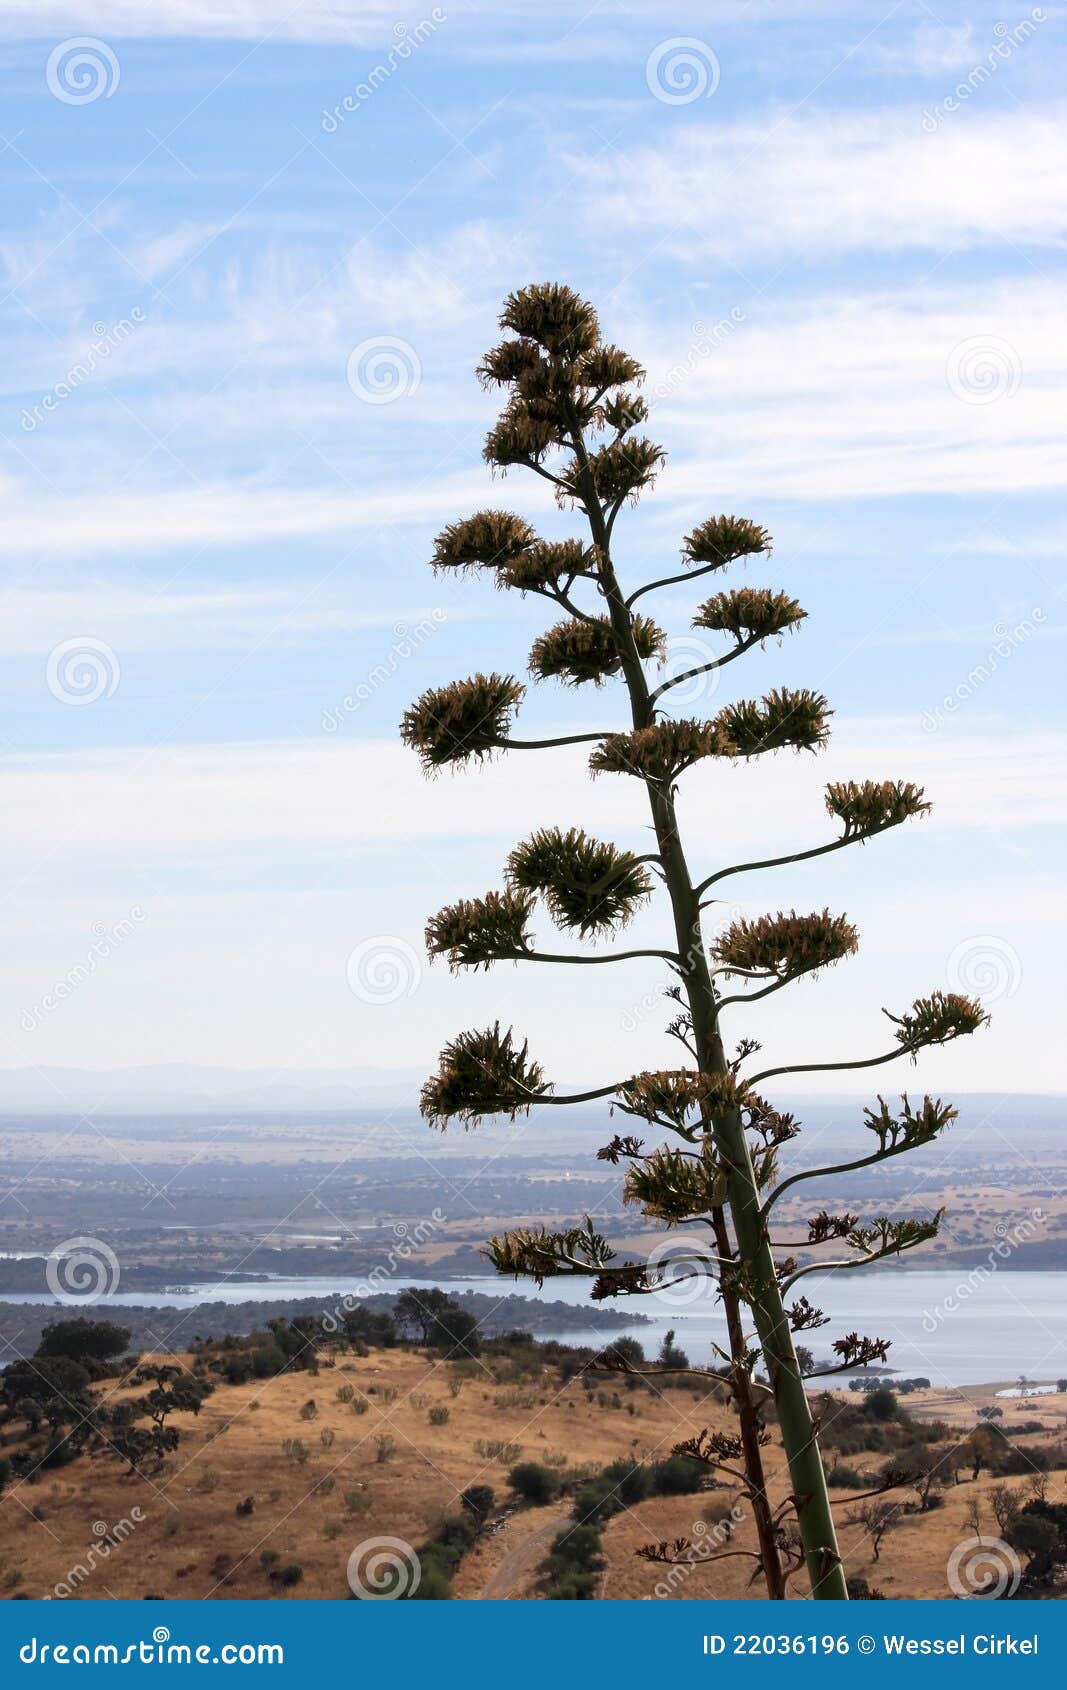 agave plant near the guadiana river in portugal